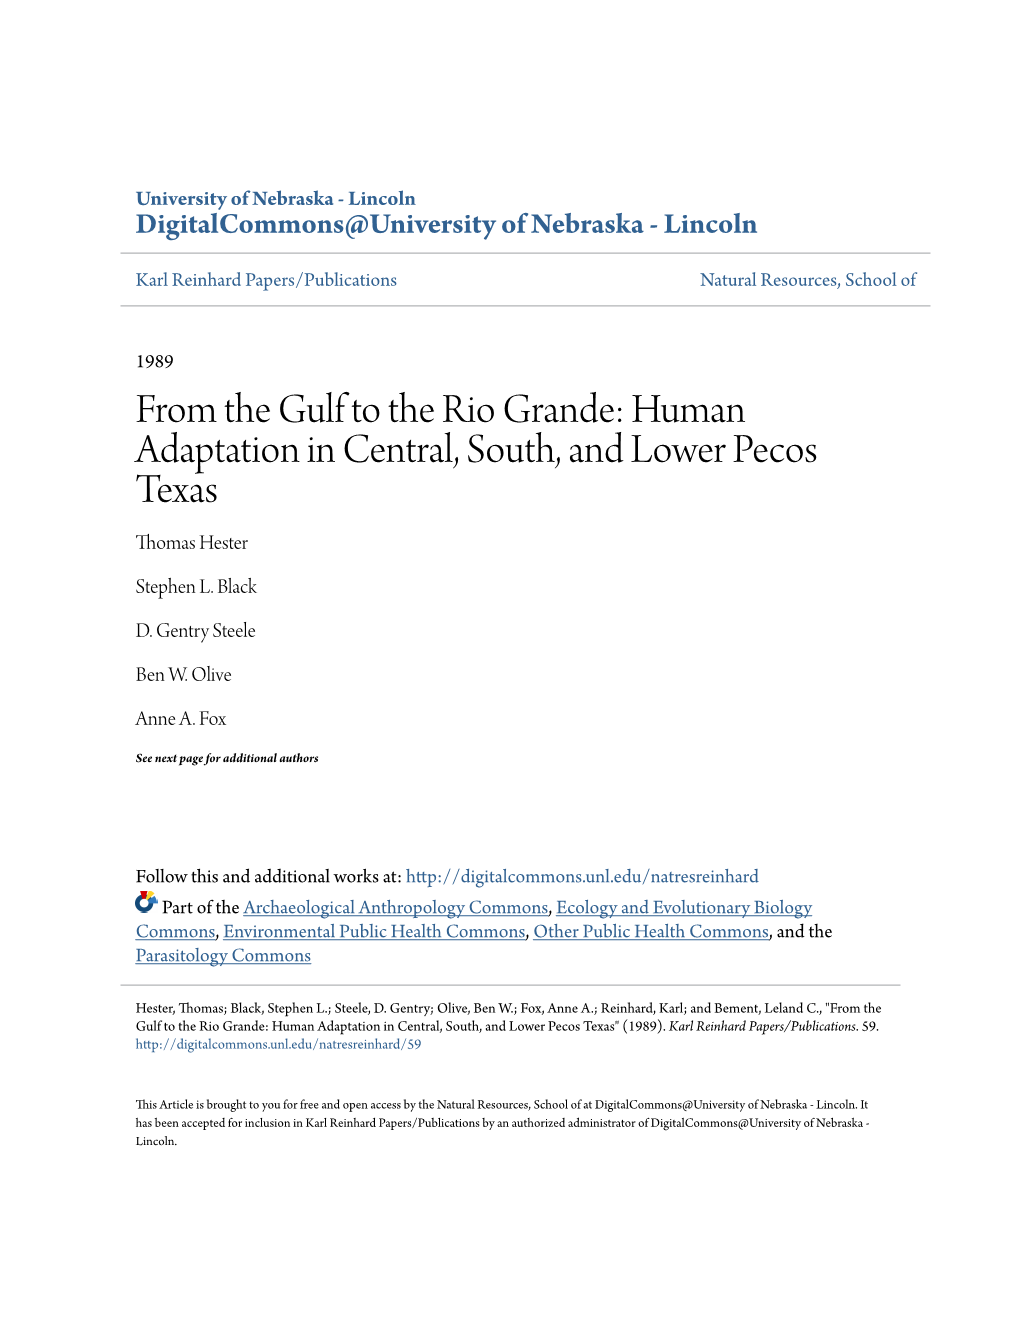 Human Adaptation in Central, South, and Lower Pecos Texas Thomas Hester